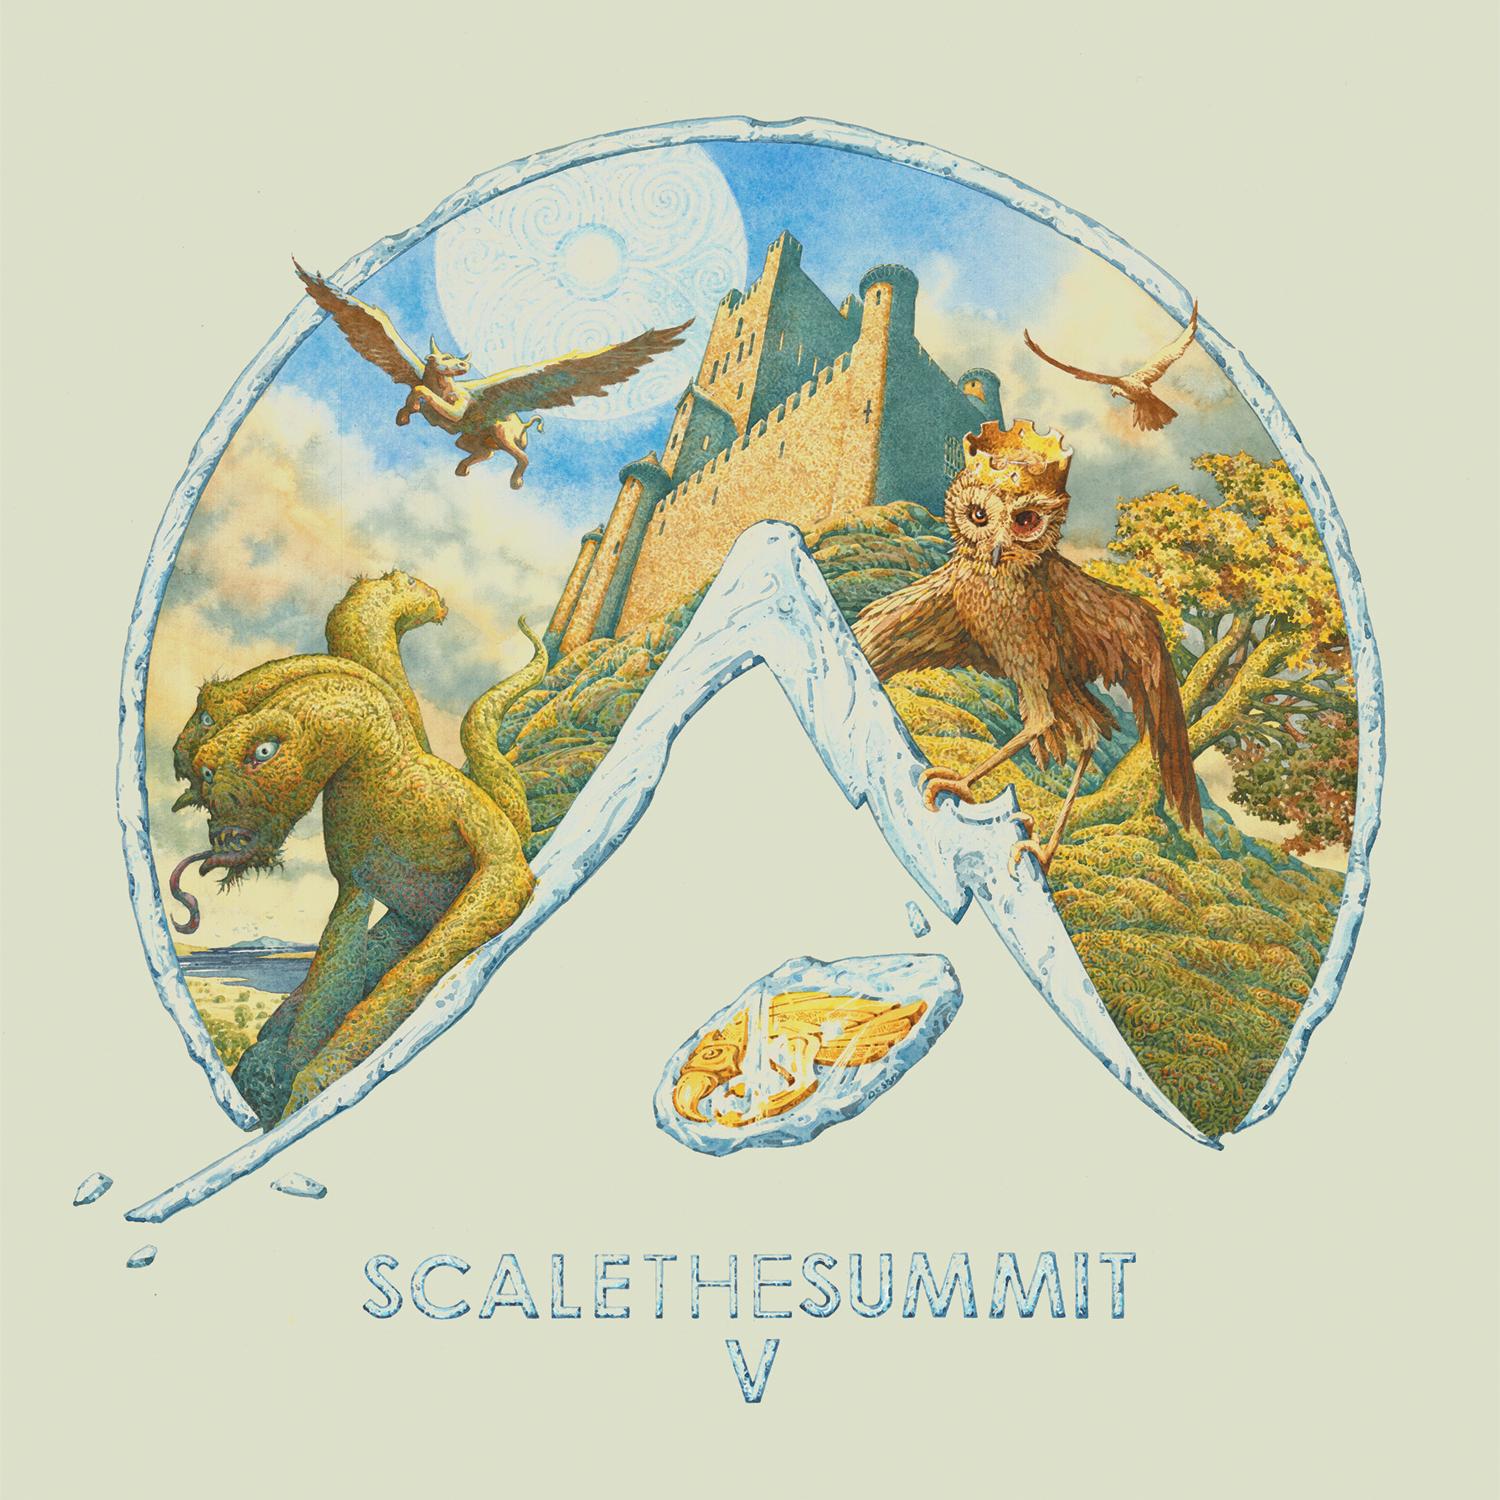 Scale The Summit - The Winged Bull